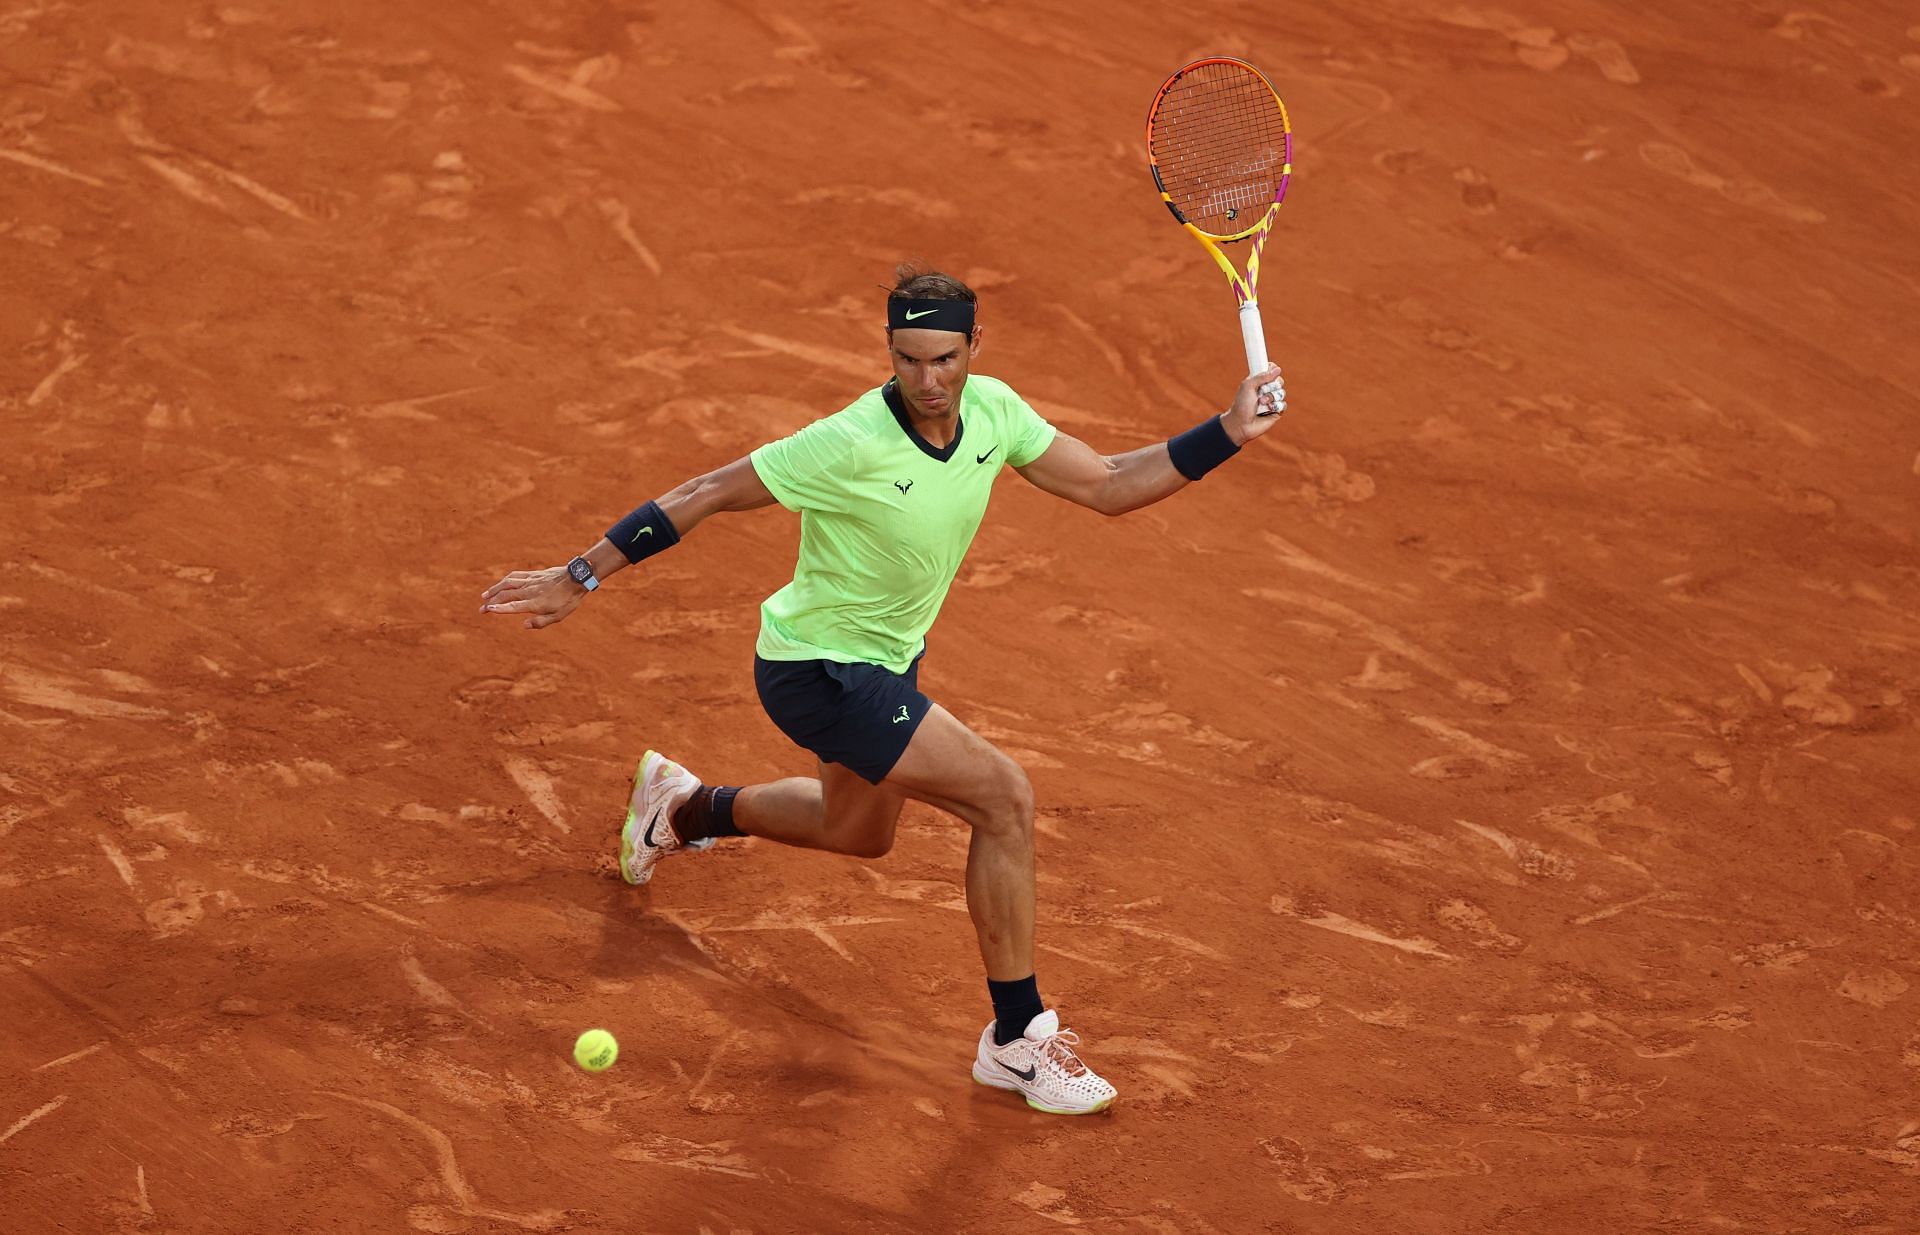 Rafael Nadal at the French Open 2021